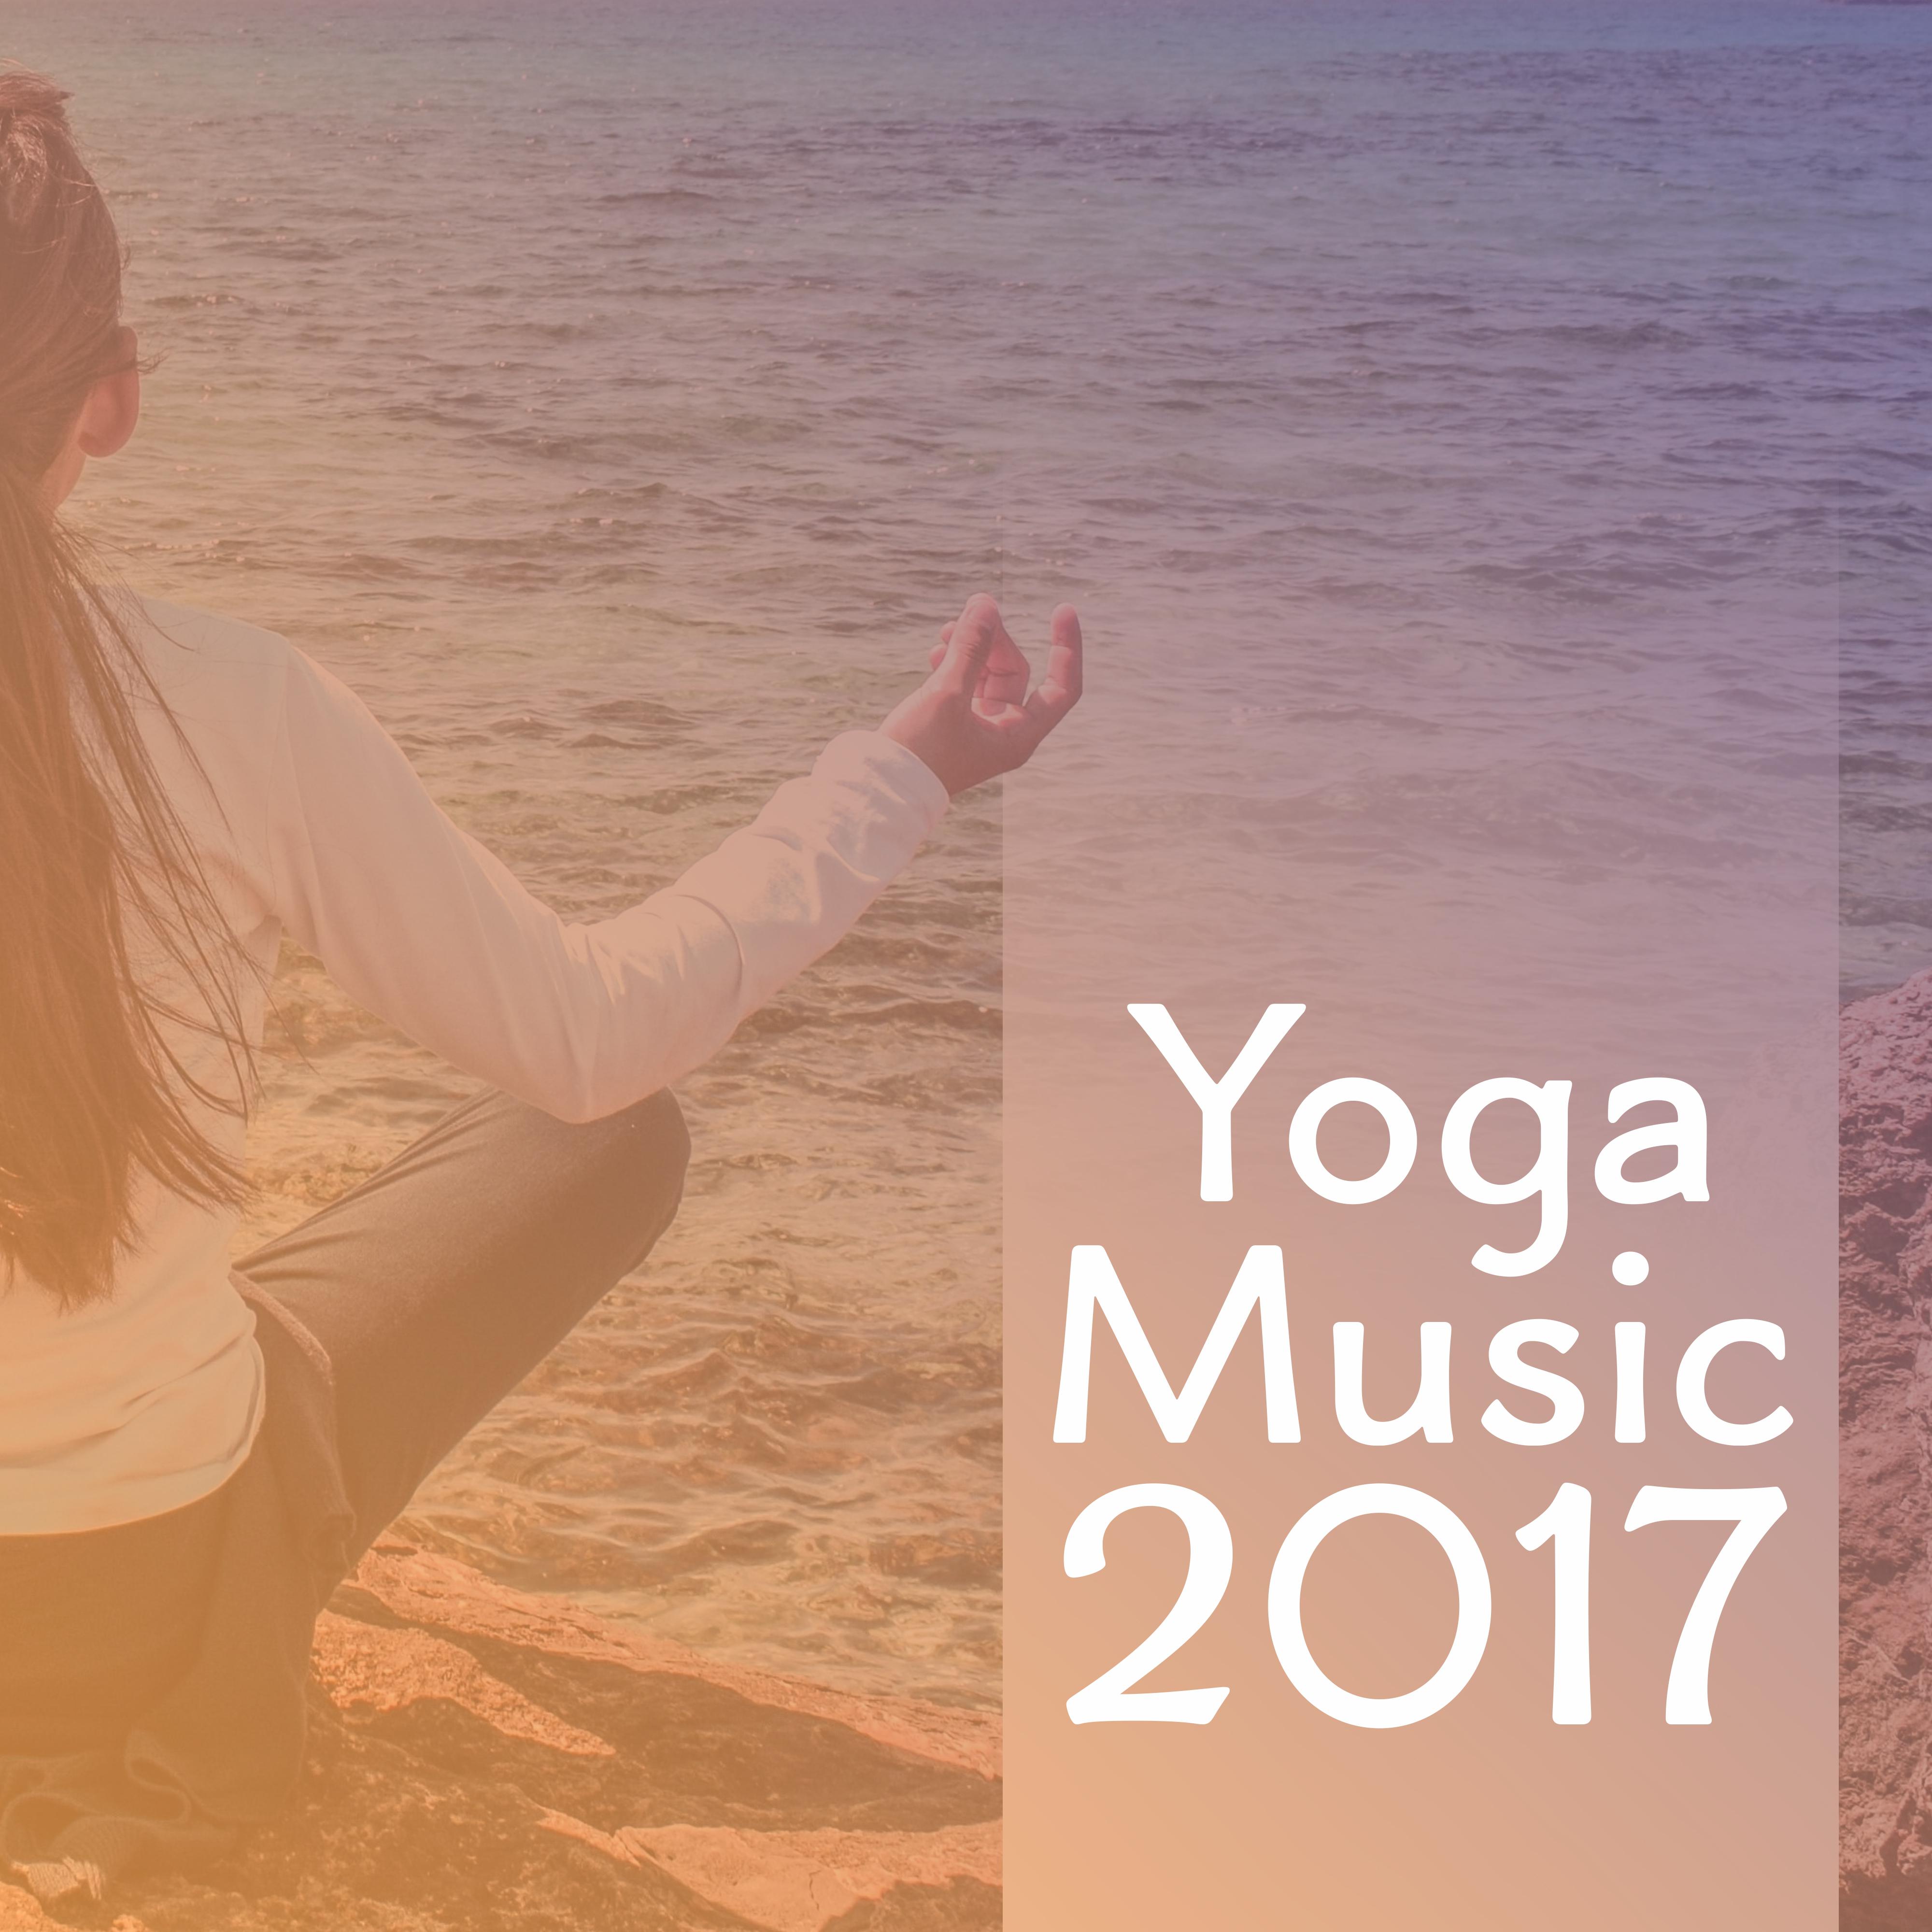 Yoga Music 2017 – Best Sounds for Yoga Training, Meditations Music to Calm Mind & Body, New Age Lounge